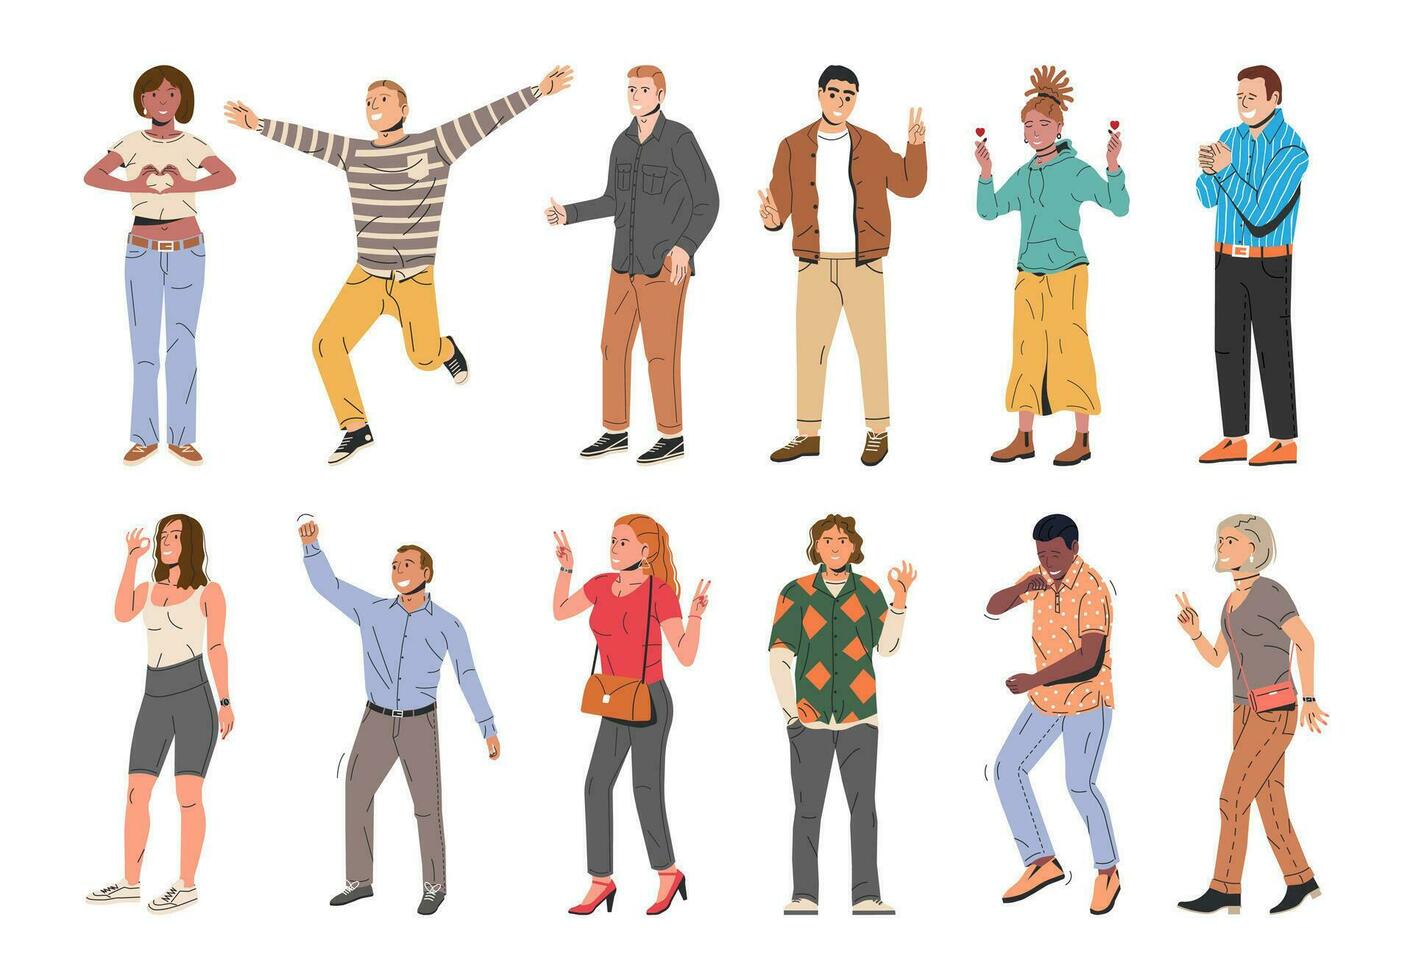 Set of Happiness Emotions Symbols. Various People Showing Positive Body Language Gestures. Woman and Man Show Victory, Heart, Love and Thumb Up Symbols. Happy People. Cartoon Flat Vector Illustration